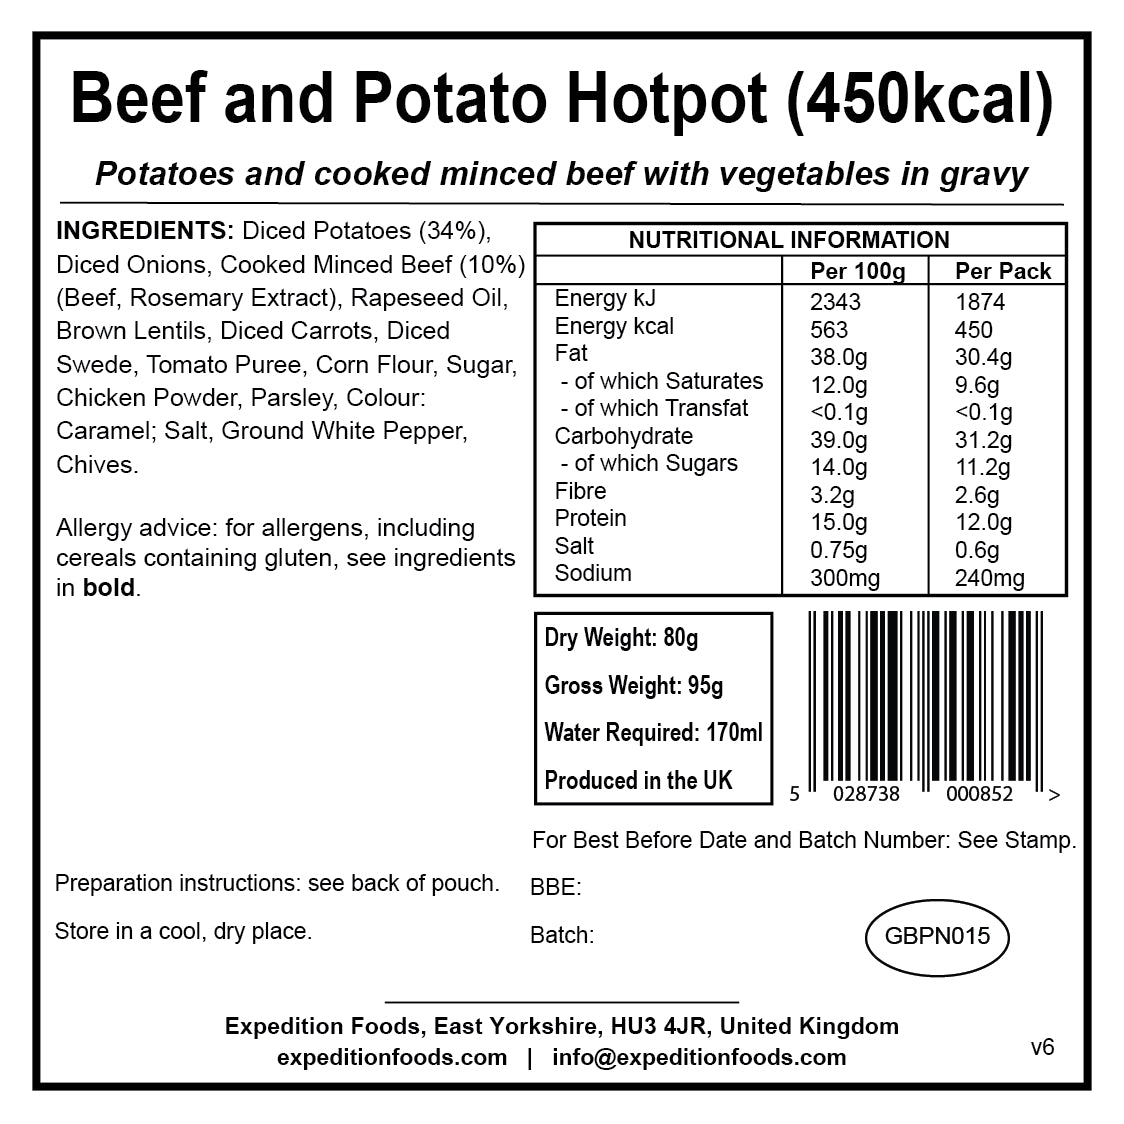 Expedition Foods Beef and Potato Hotpot (450kcal)